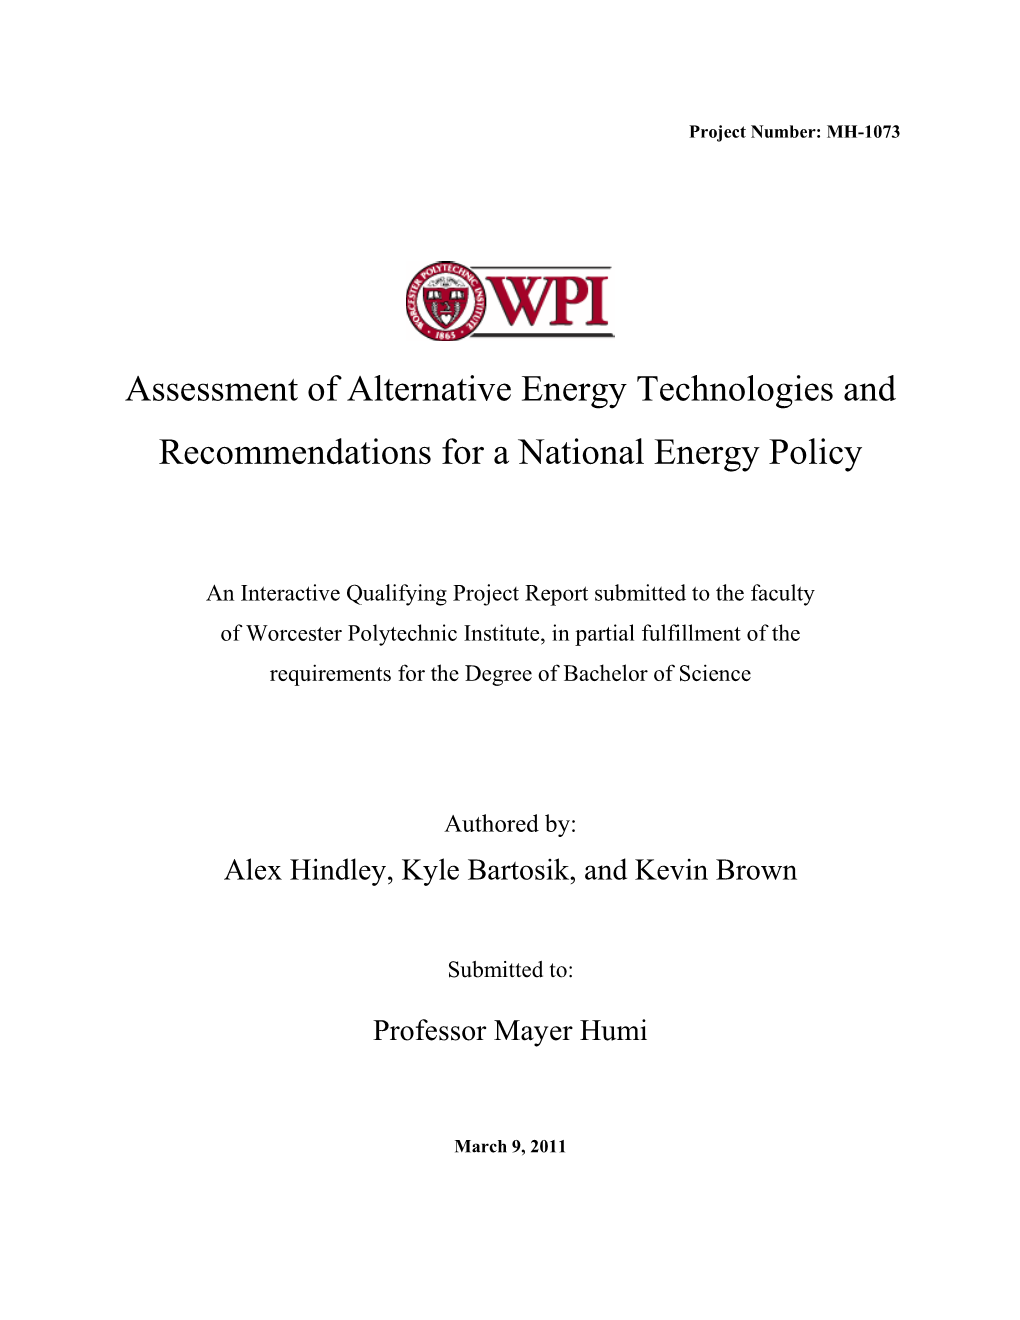 Assessment of Alternative Energy Technologies and Recommendations for a National Energy Policy